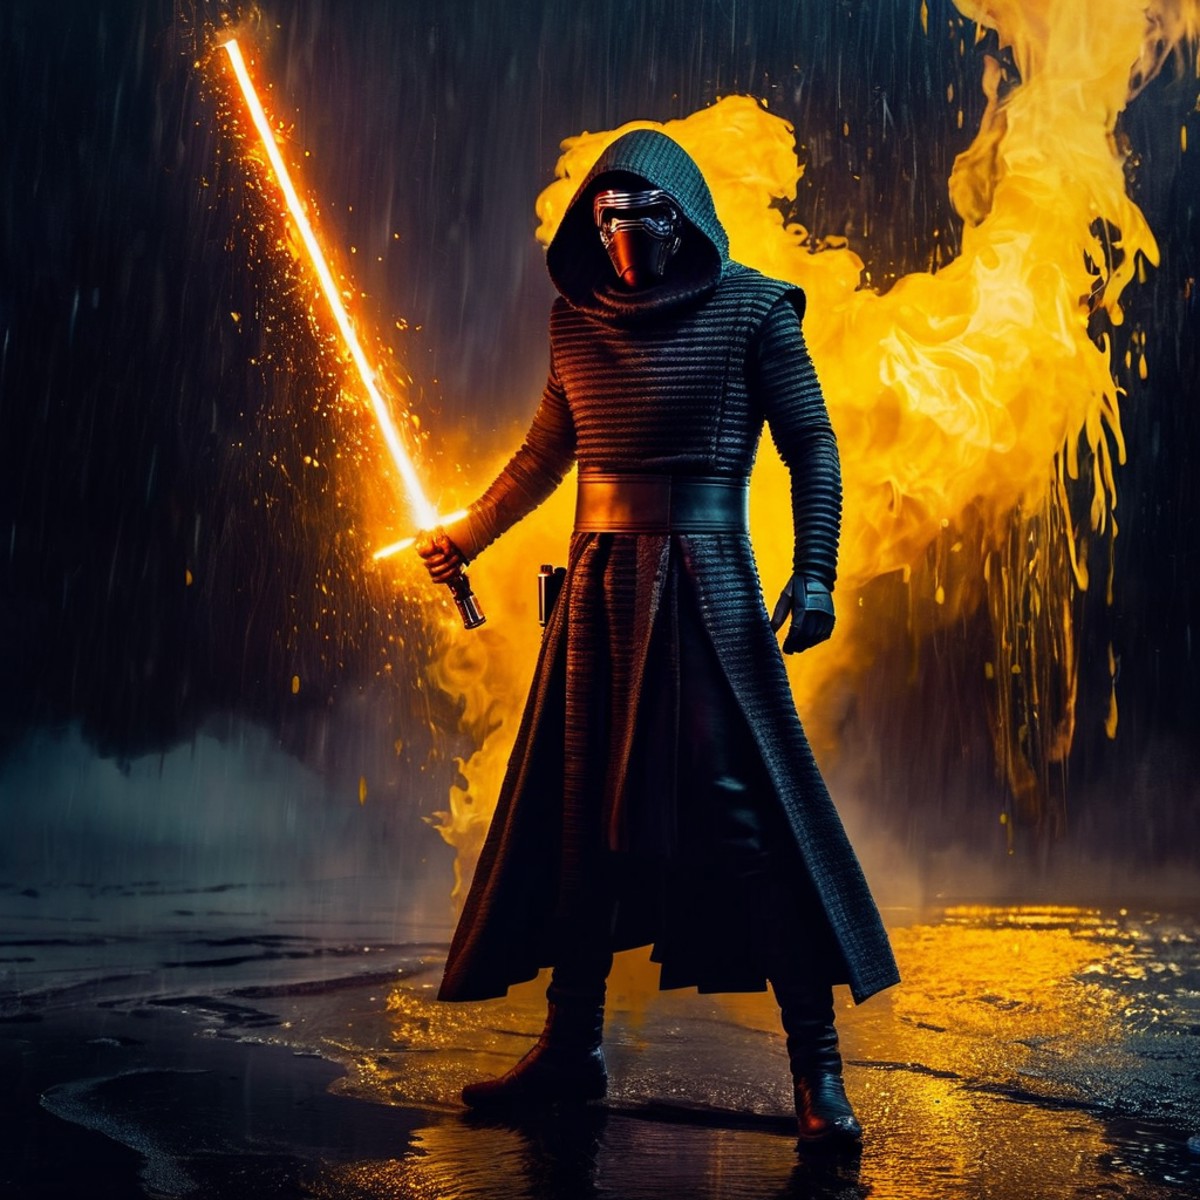 Dark Fantasy Art of  <lora:Kylo Ren:1.2>
Kylo Ren an realistic photo of a man in a dark suit holding a  lightsaber with ye...